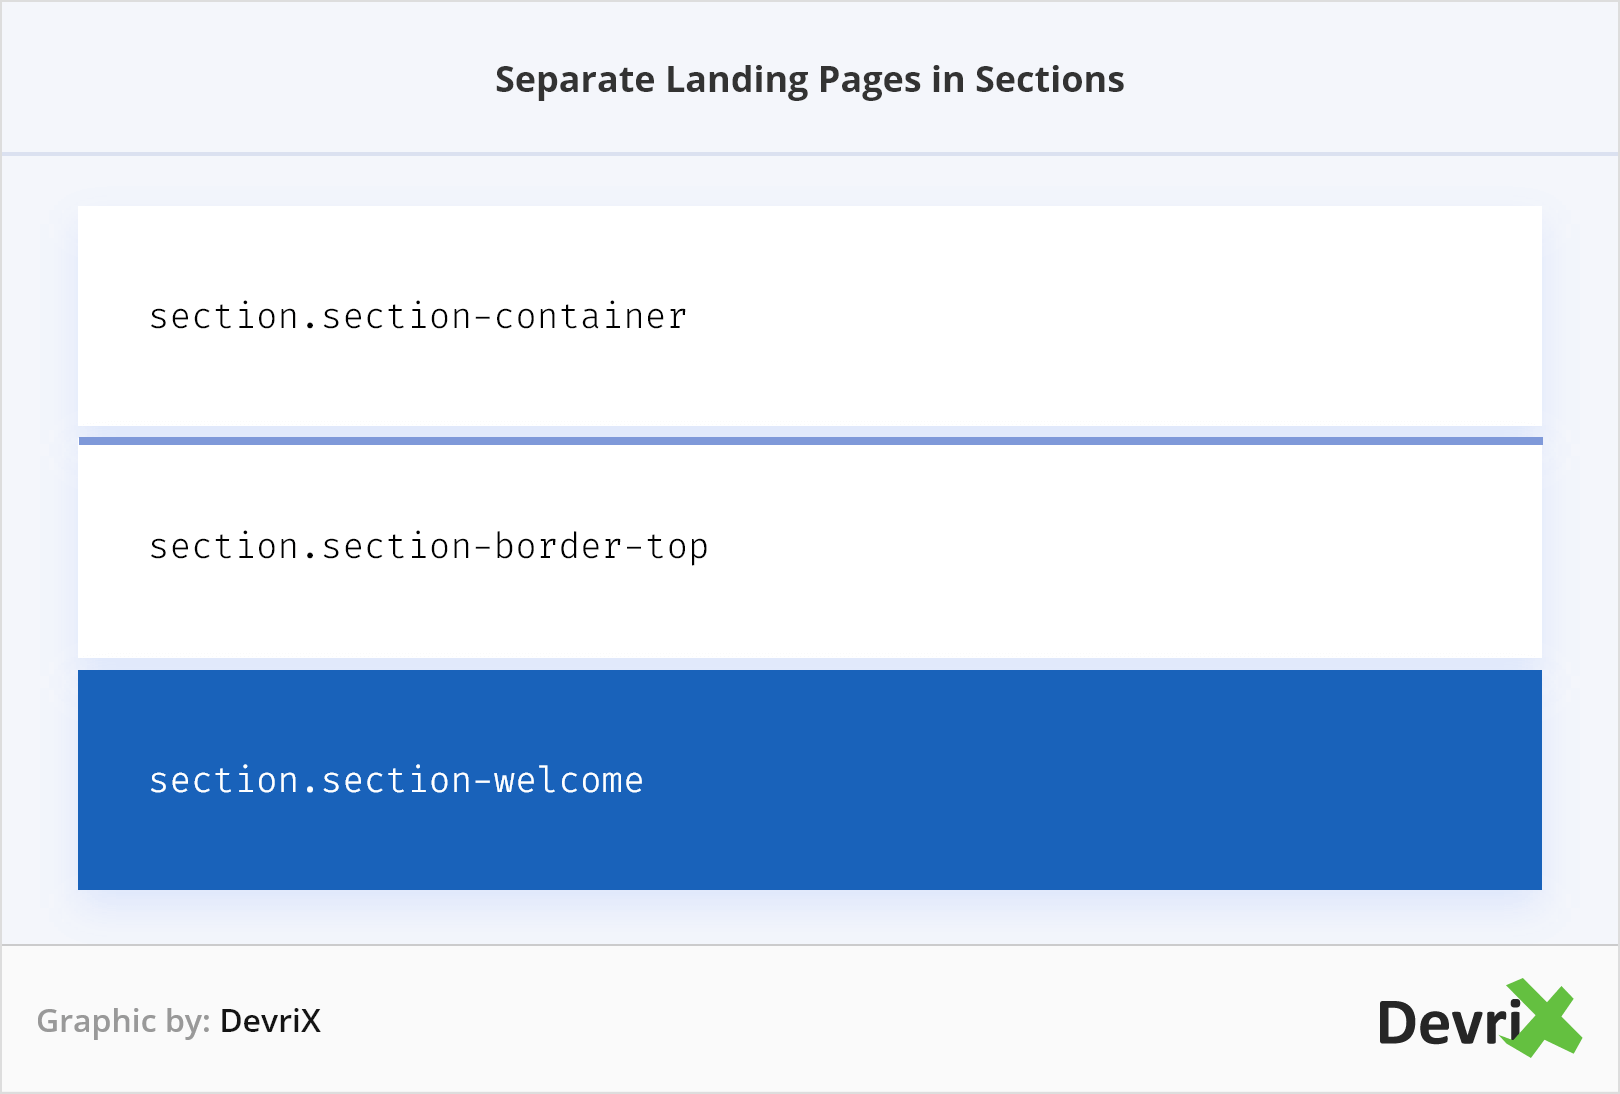 Separate Landing Pages in Abschnitten